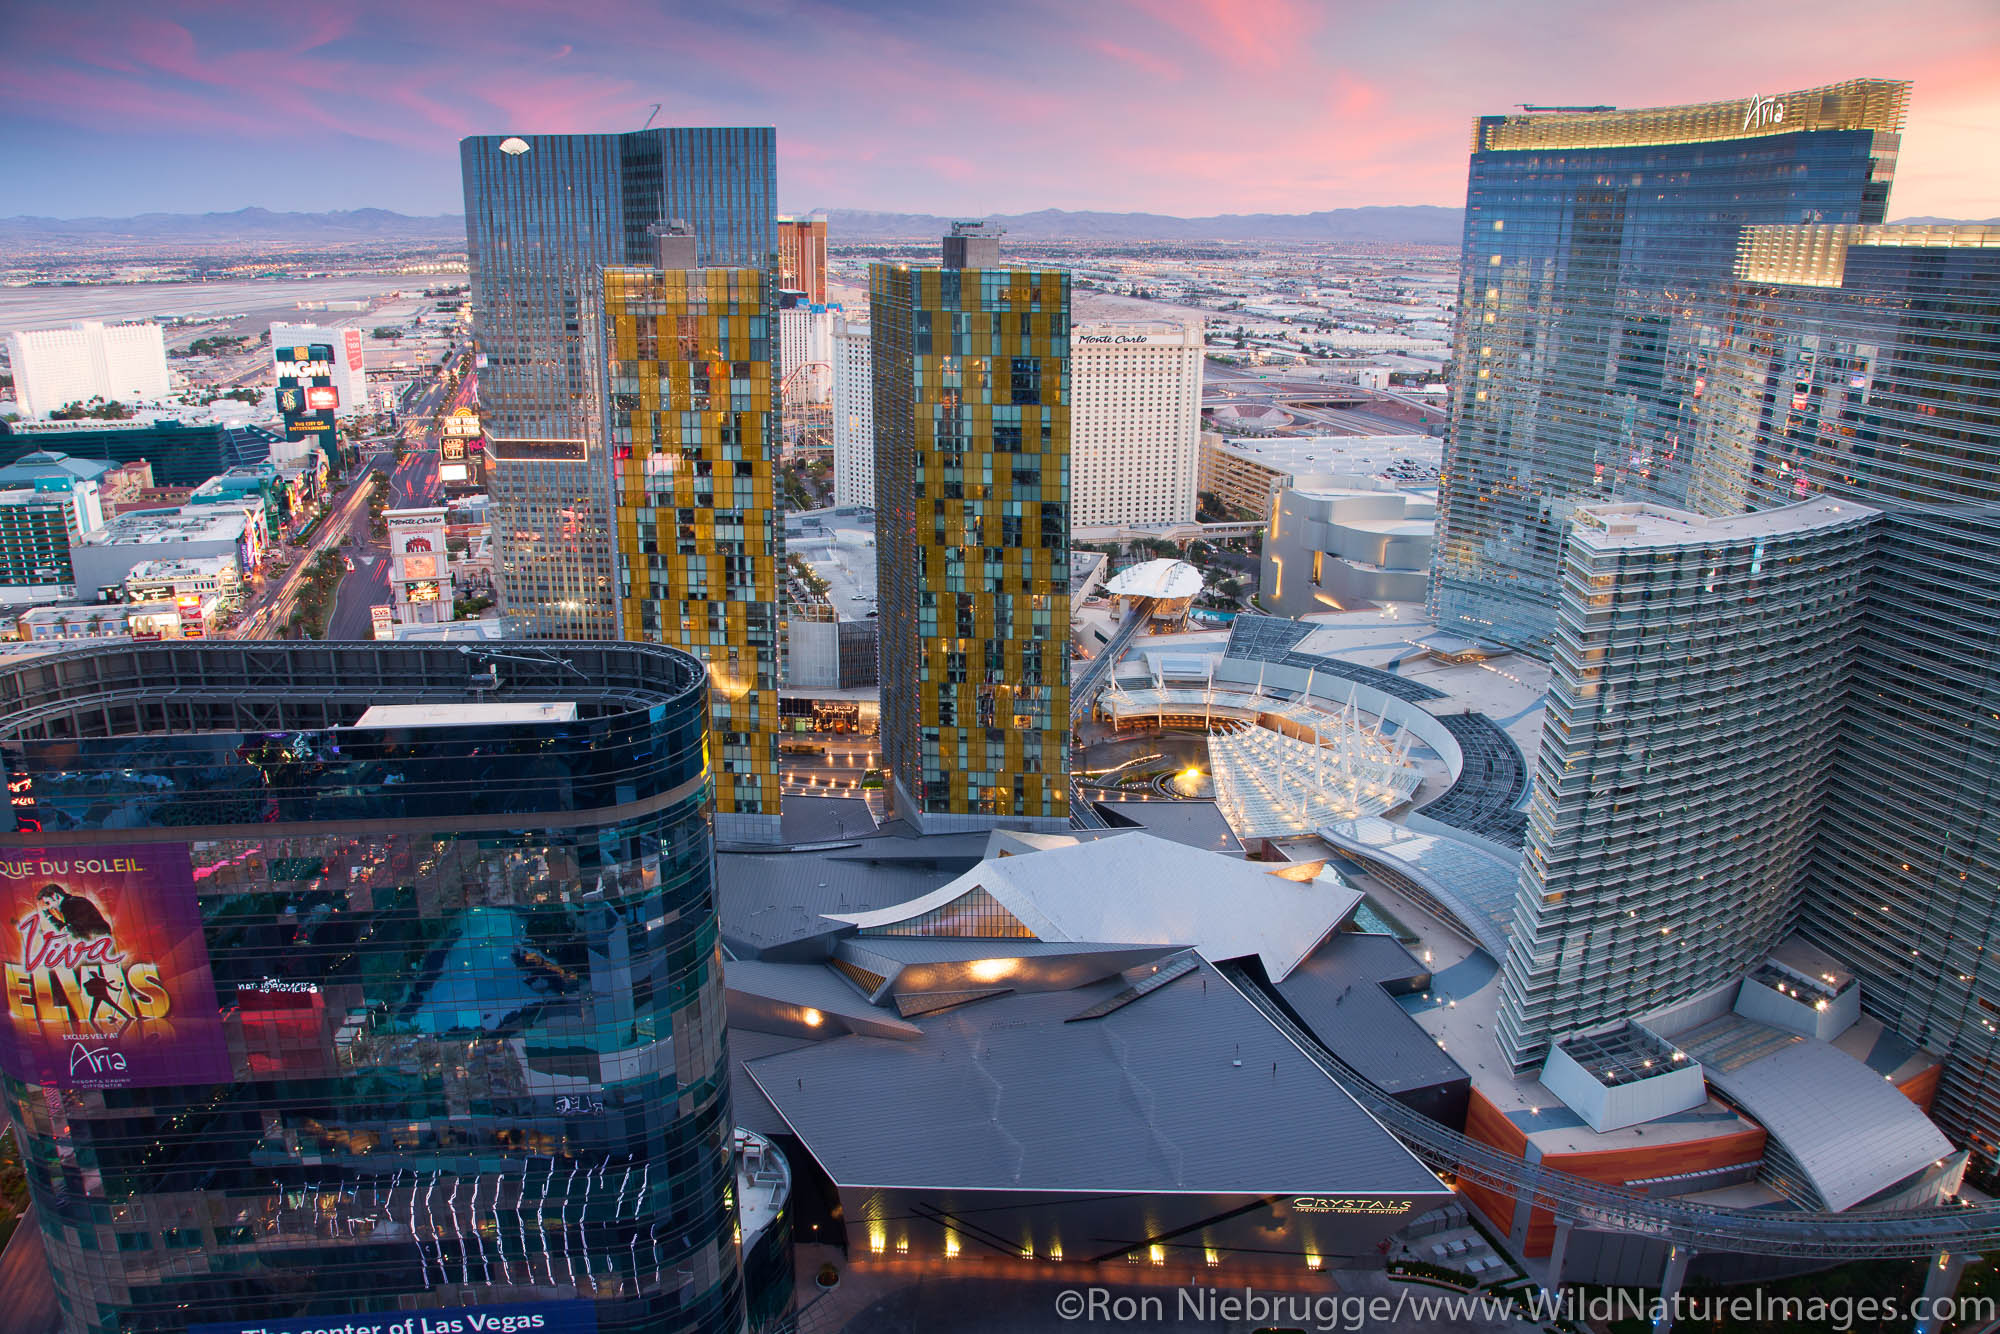 City Center including the Aria, Crystals, The Residences at Mandarian Oriental and Veer Towers, Las Vegas, Nevada.